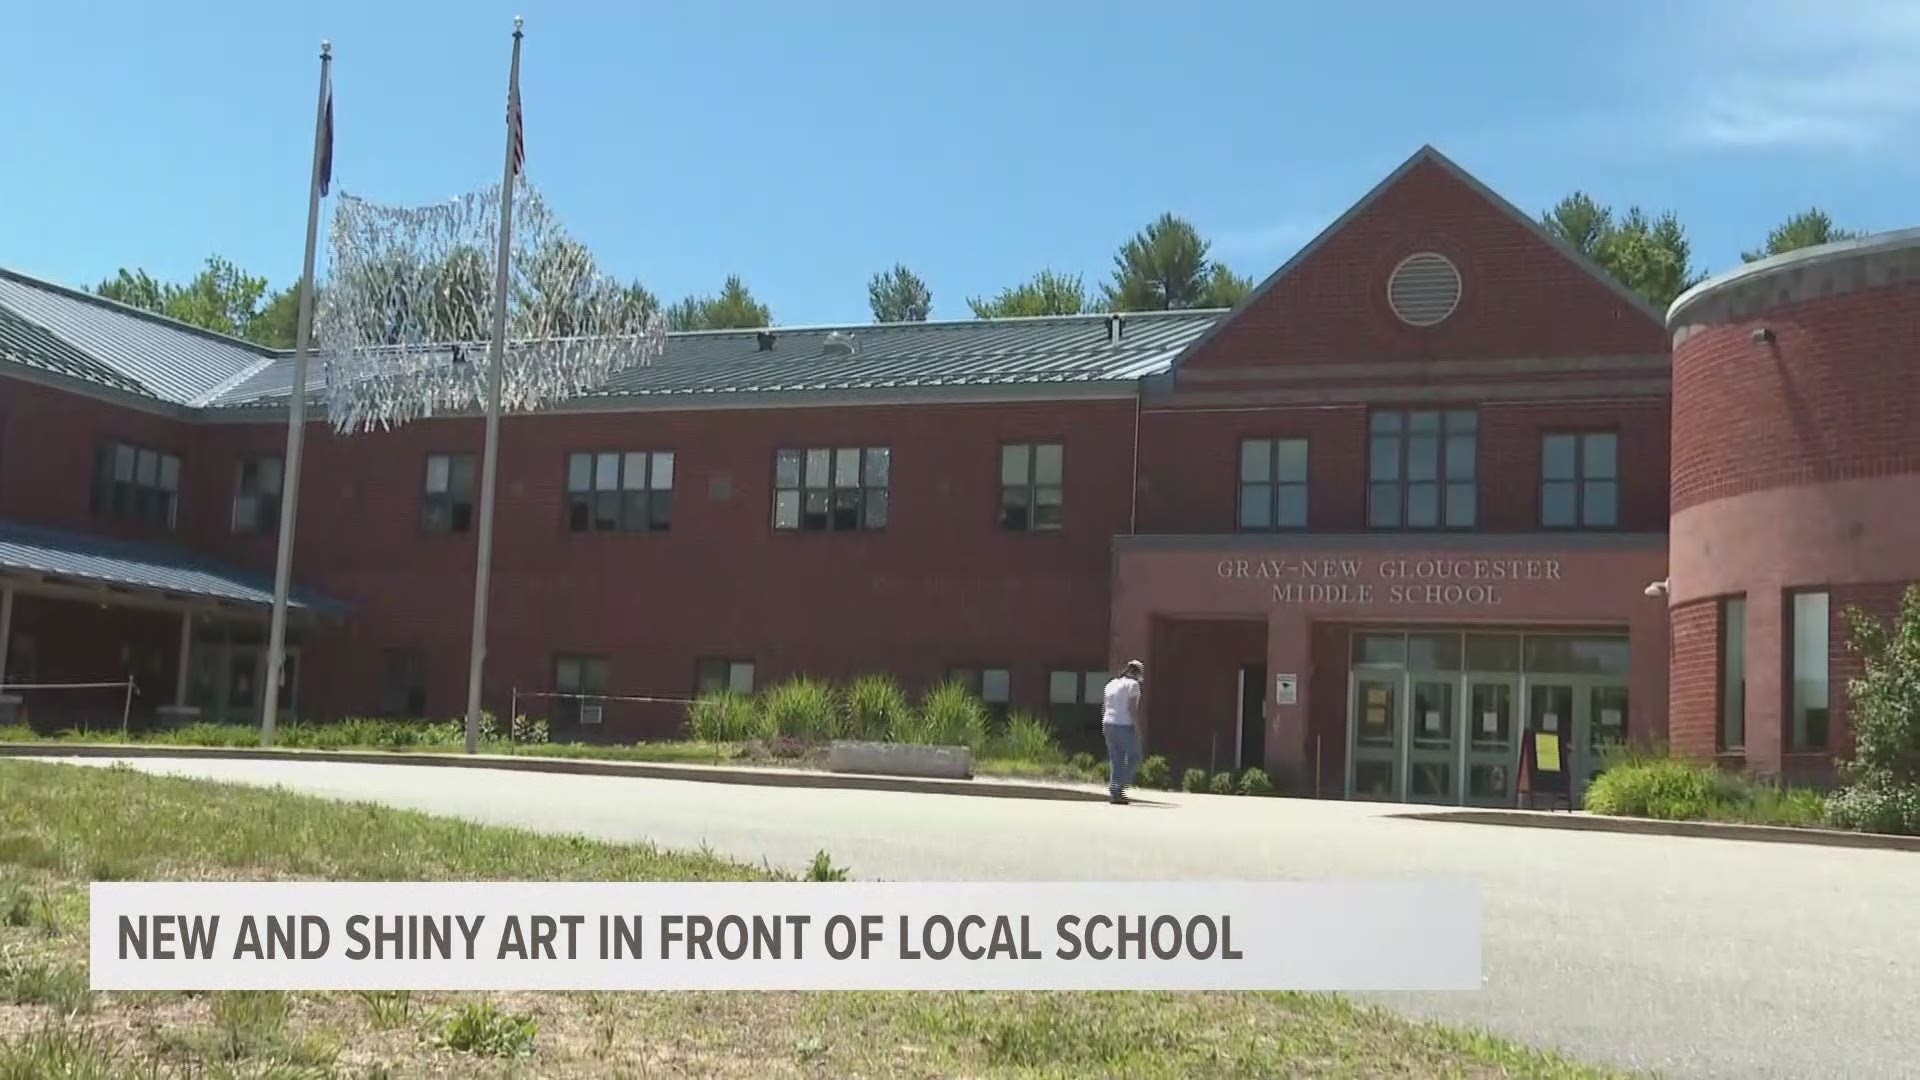 The art teacher at Gray-New Gloucester Middle School started the art project with students before the pandemic